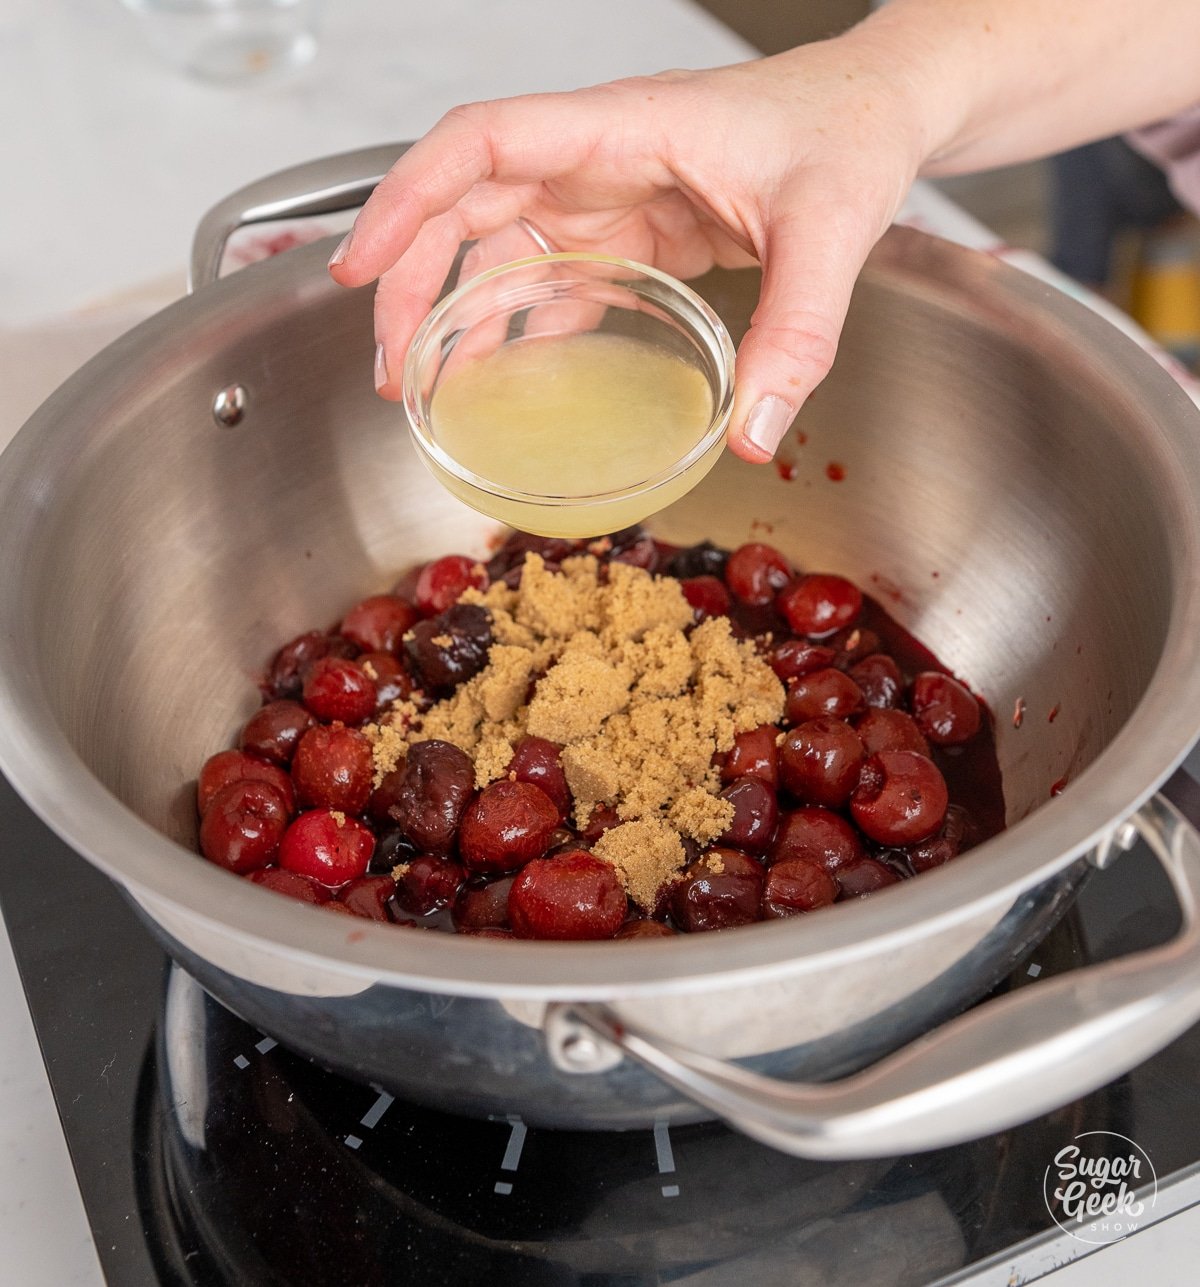 hand pouring a bowl of lemon juice into a pot with cherries